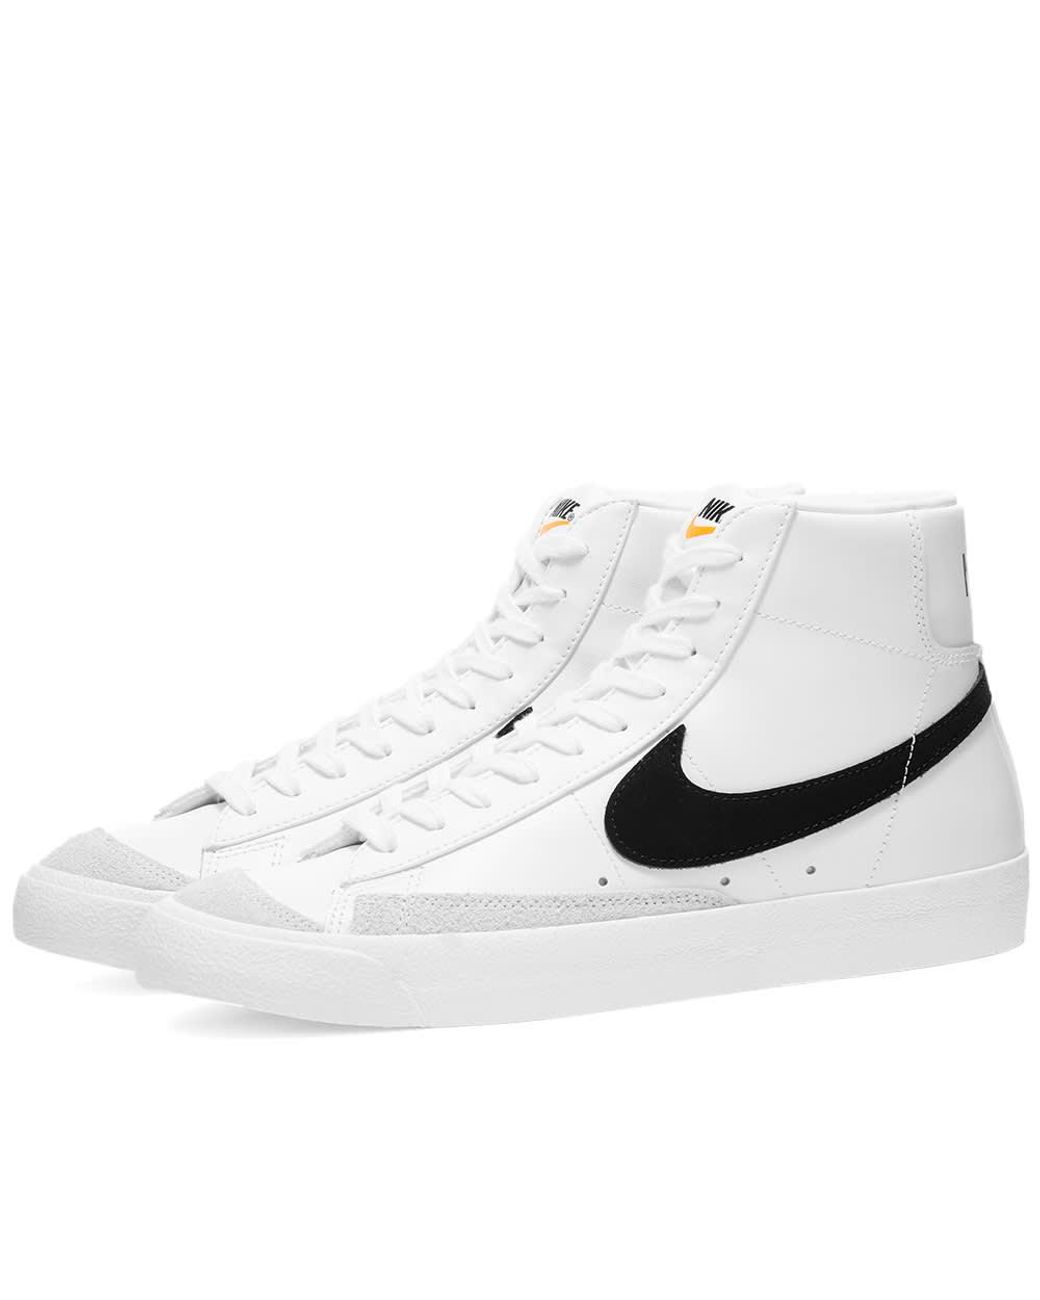 Nike Leather Blazer Mid 77 in White/Black (White) - Save 42% | Lyst Canada